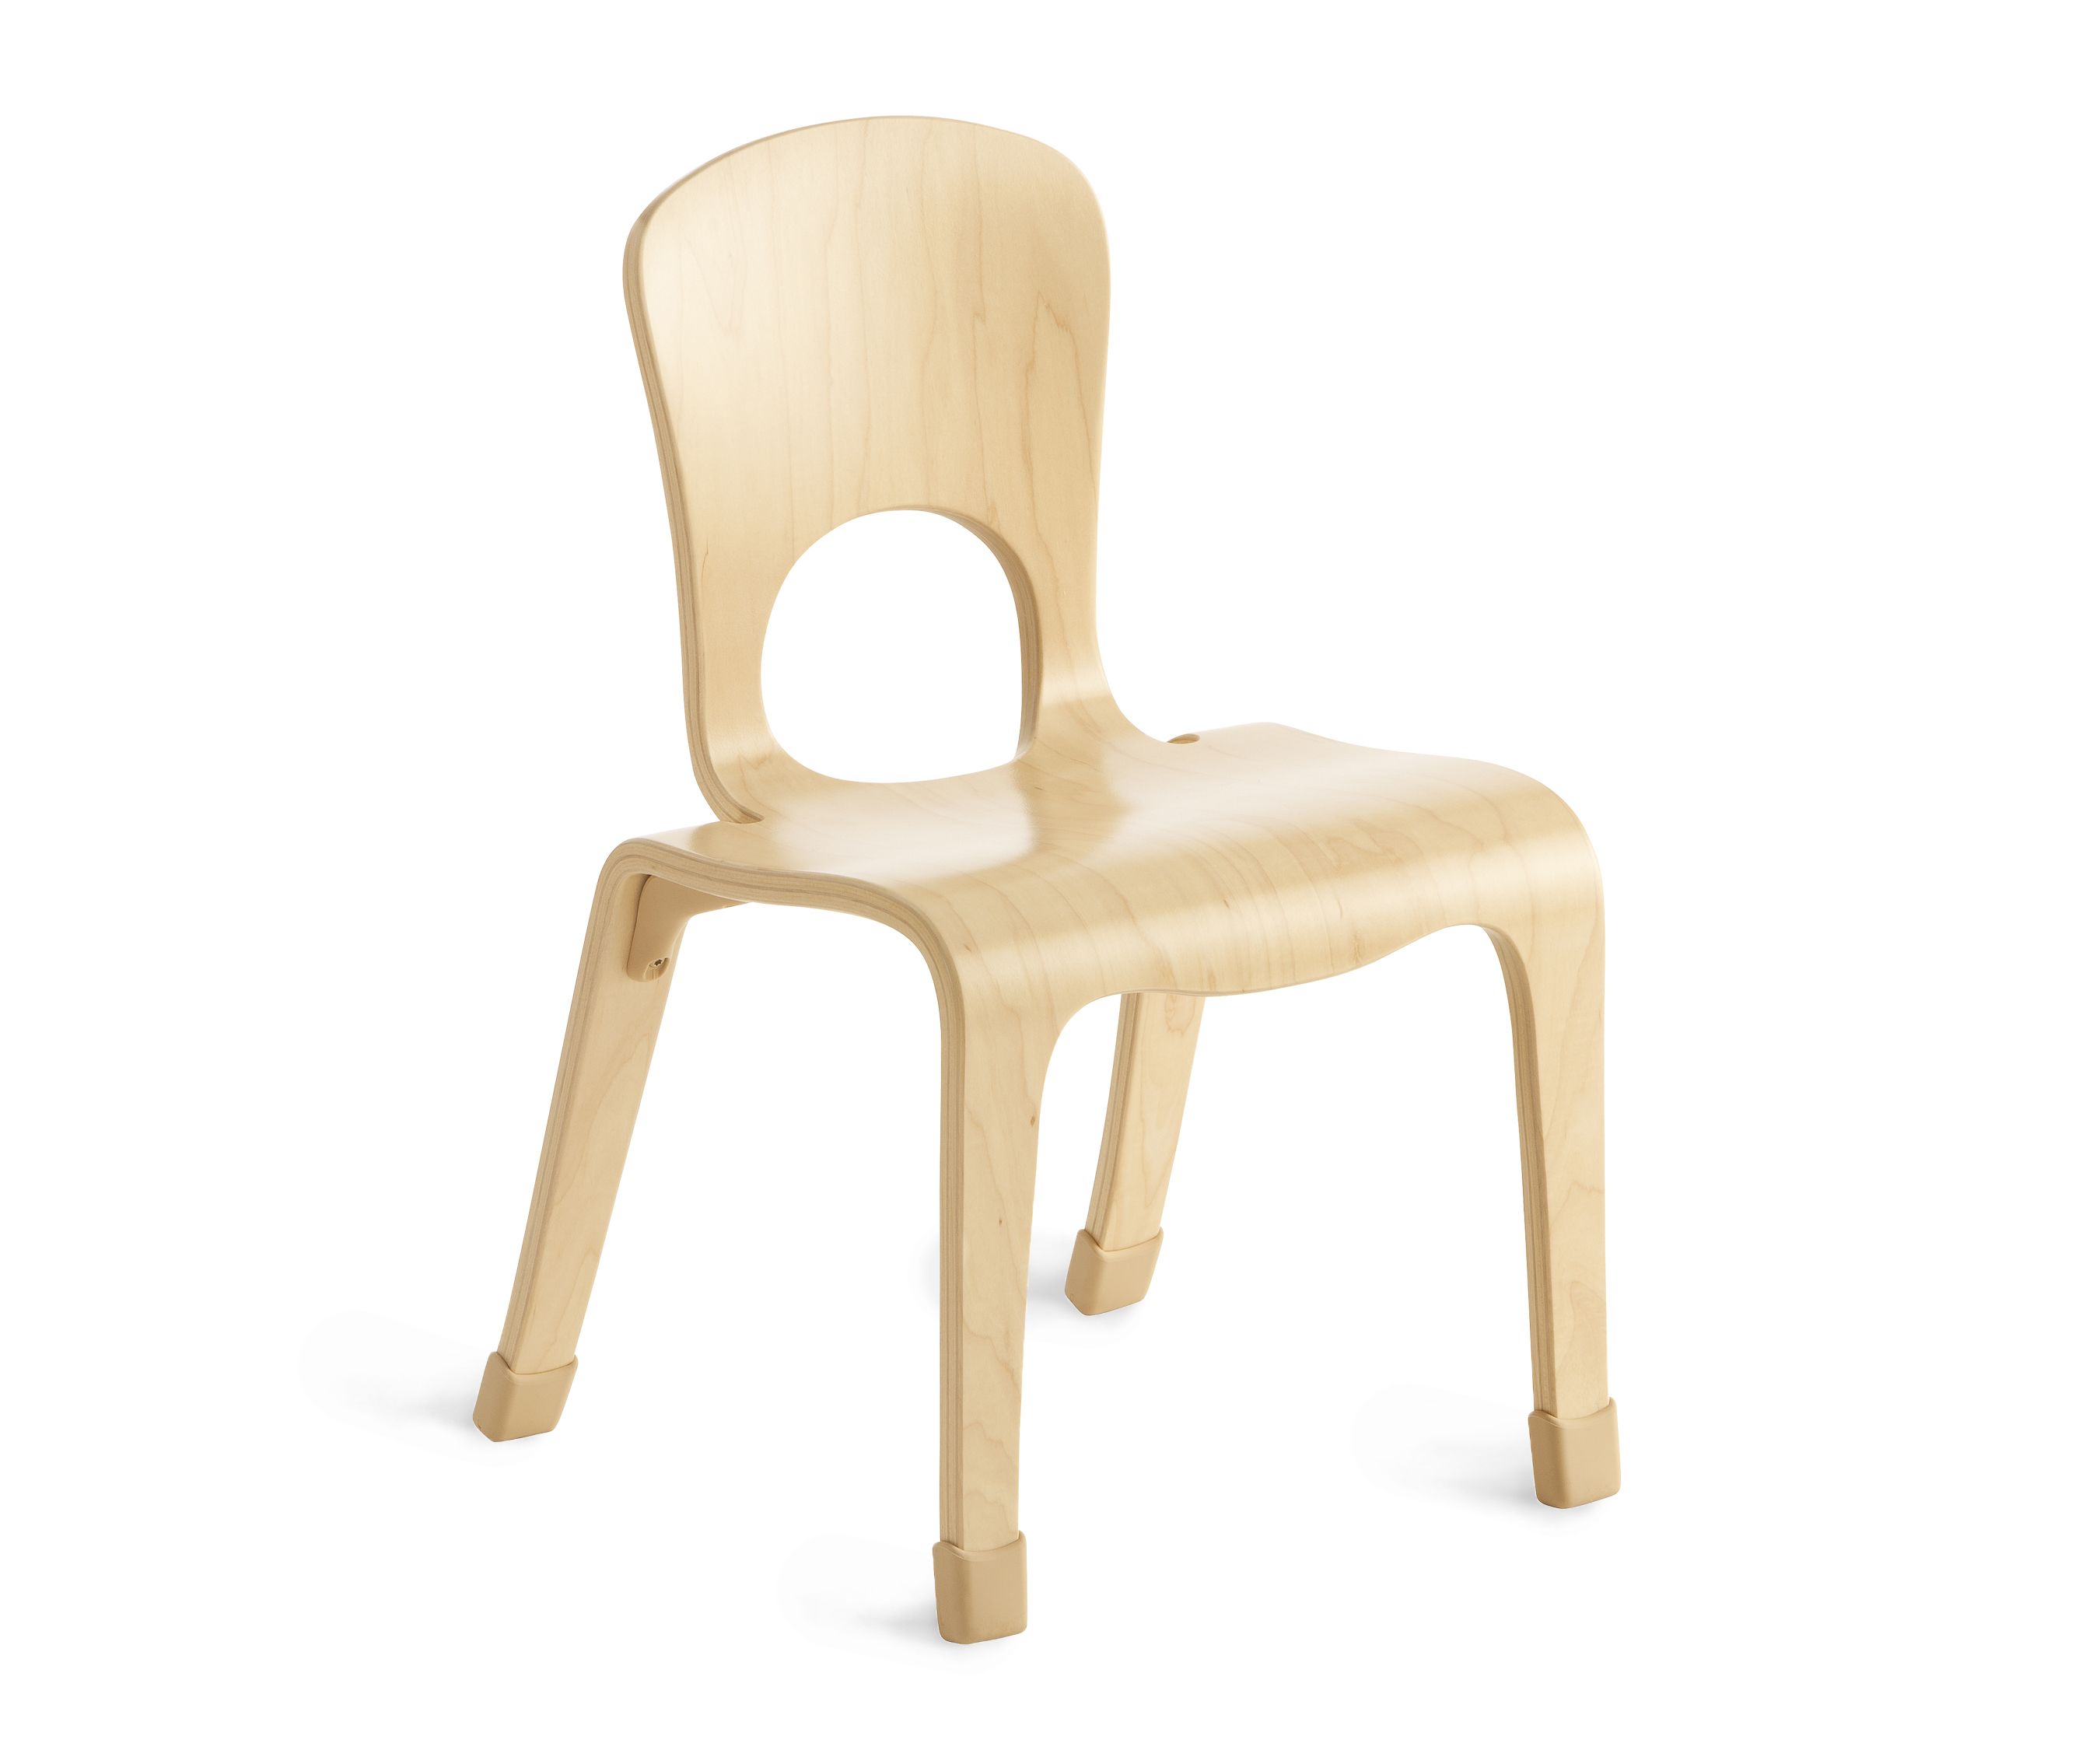 https://www.communityplaythings.com/-/media/images/product-images/classroom/chairs-and-seating/variant-images/j712.ashx?rev=9650b2a3f2424443aa4fc94c846ba6ea&hash=98A2CC12F945C246407BFD1AE289CC38